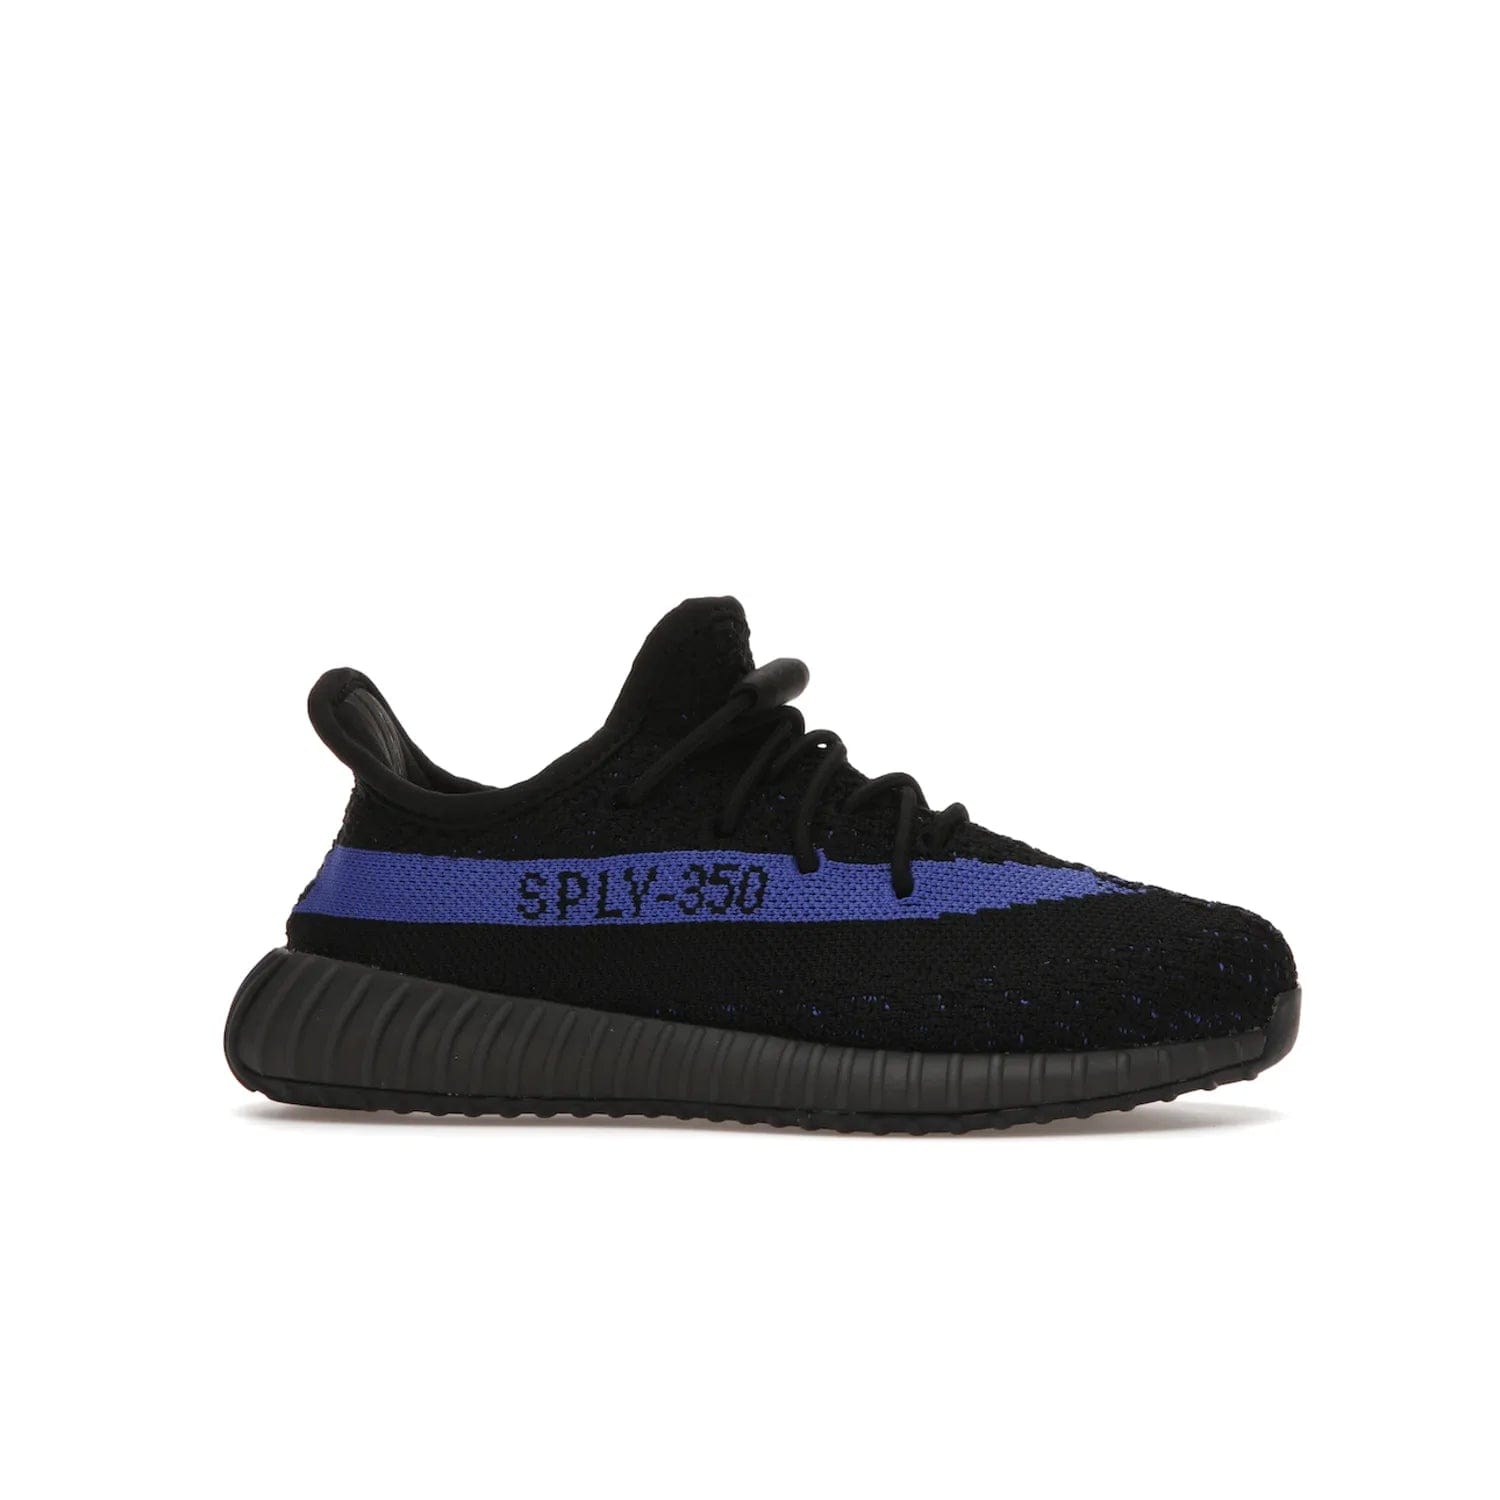 adidas Yeezy Boost 350 V2 Dazzling Blue (Kids) - Image 2 - Only at www.BallersClubKickz.com - Shop the adidas Yeezy Boost 350 V2 Dazzling Blue (Kids). Features a black Primeknit upper with a royal blue 'SPLY-350' streak and a full-length Boost midsole. Durable rubber outsole provides plenty of traction. Available for $160.